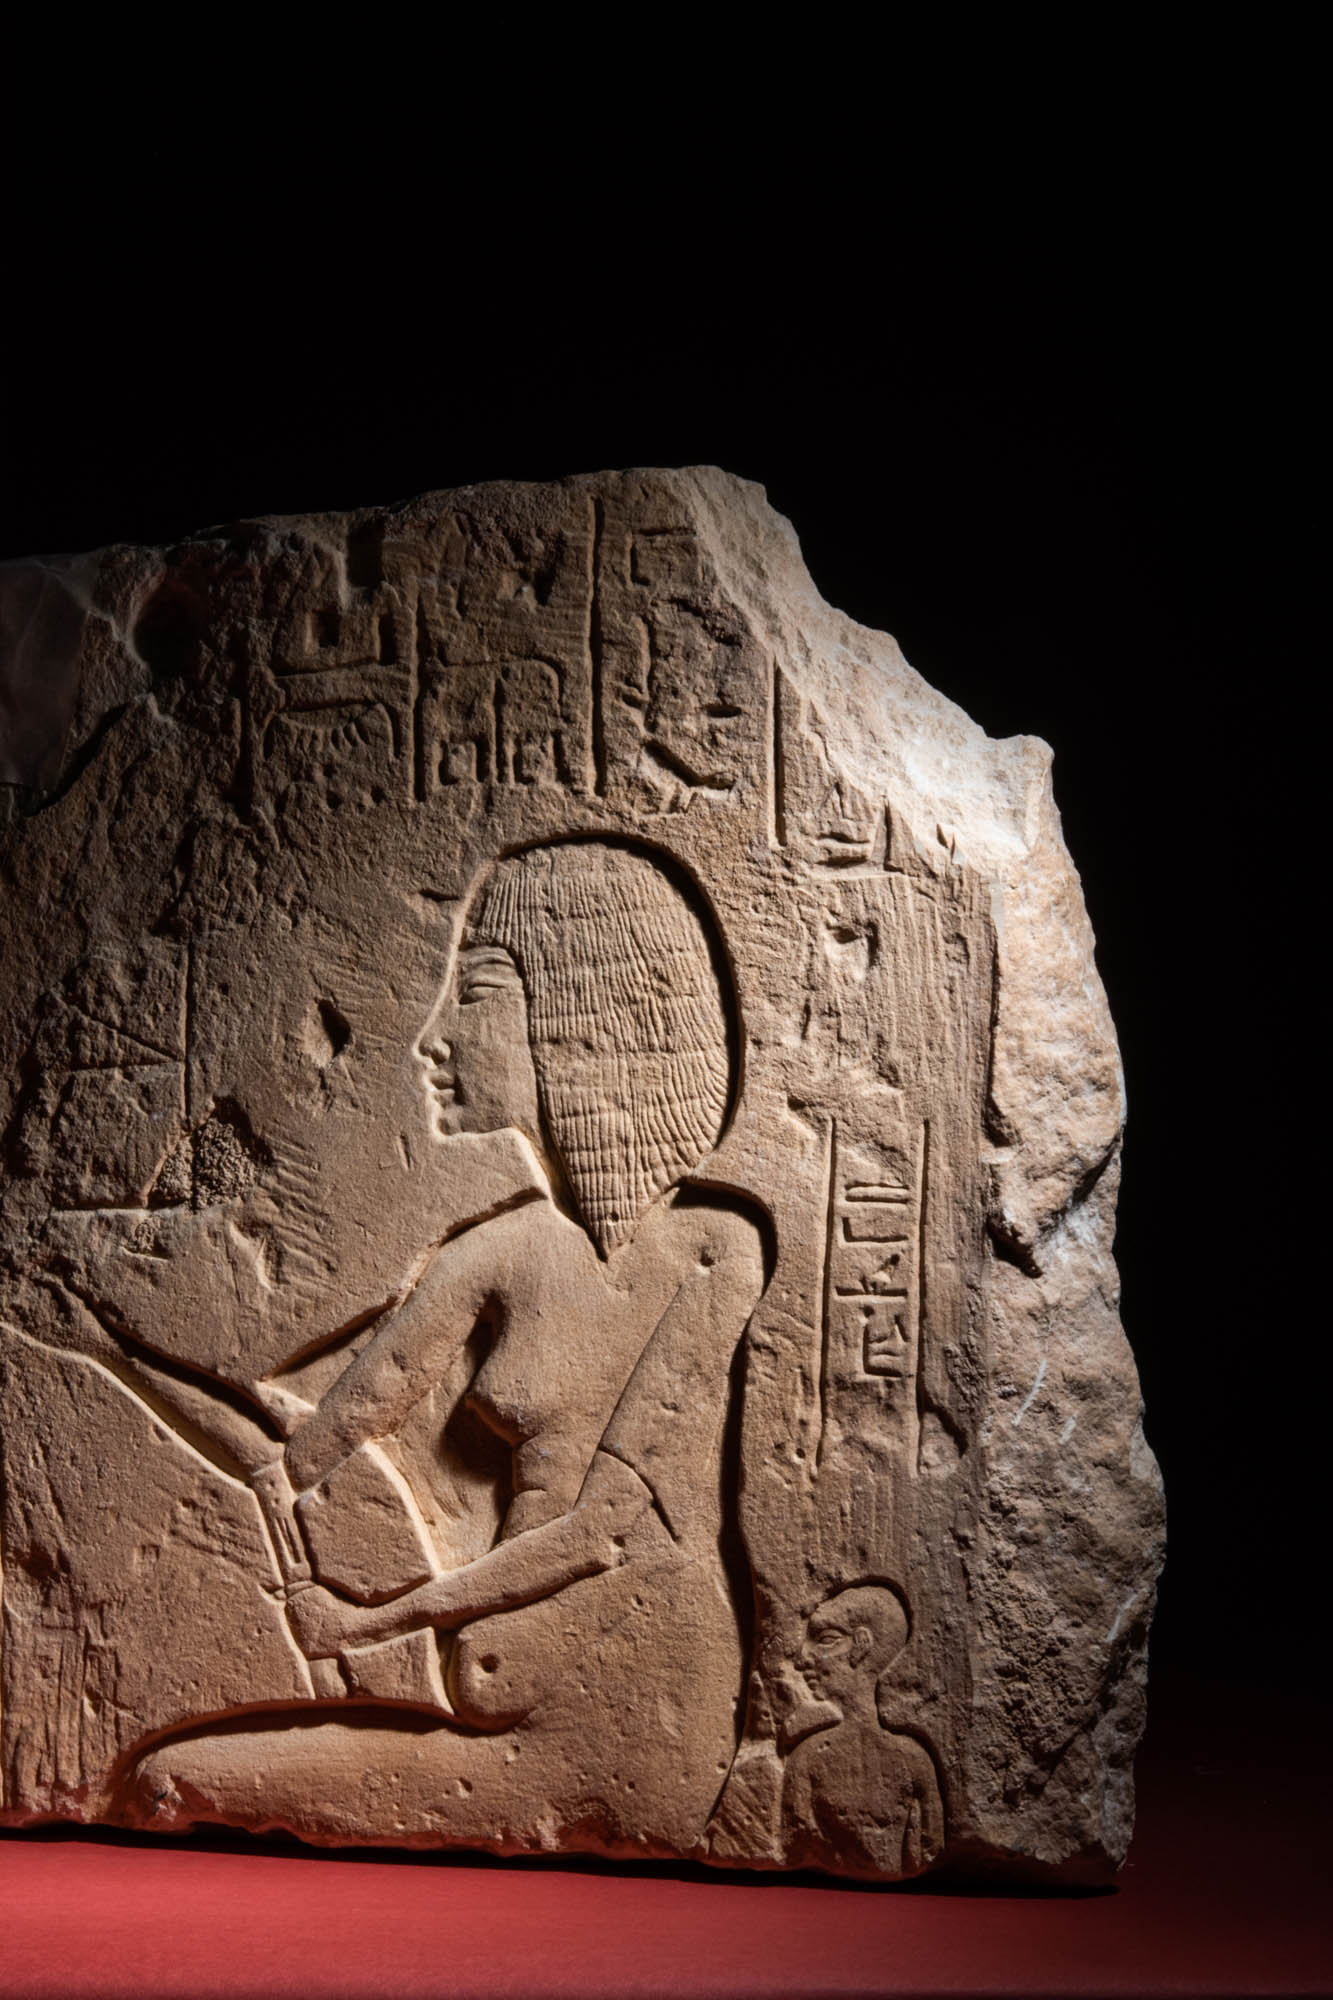 NEW KINGDOM EGYPTIAN RELIEF DEPICTING A HIGH OFFICIAL - Image 2 of 8